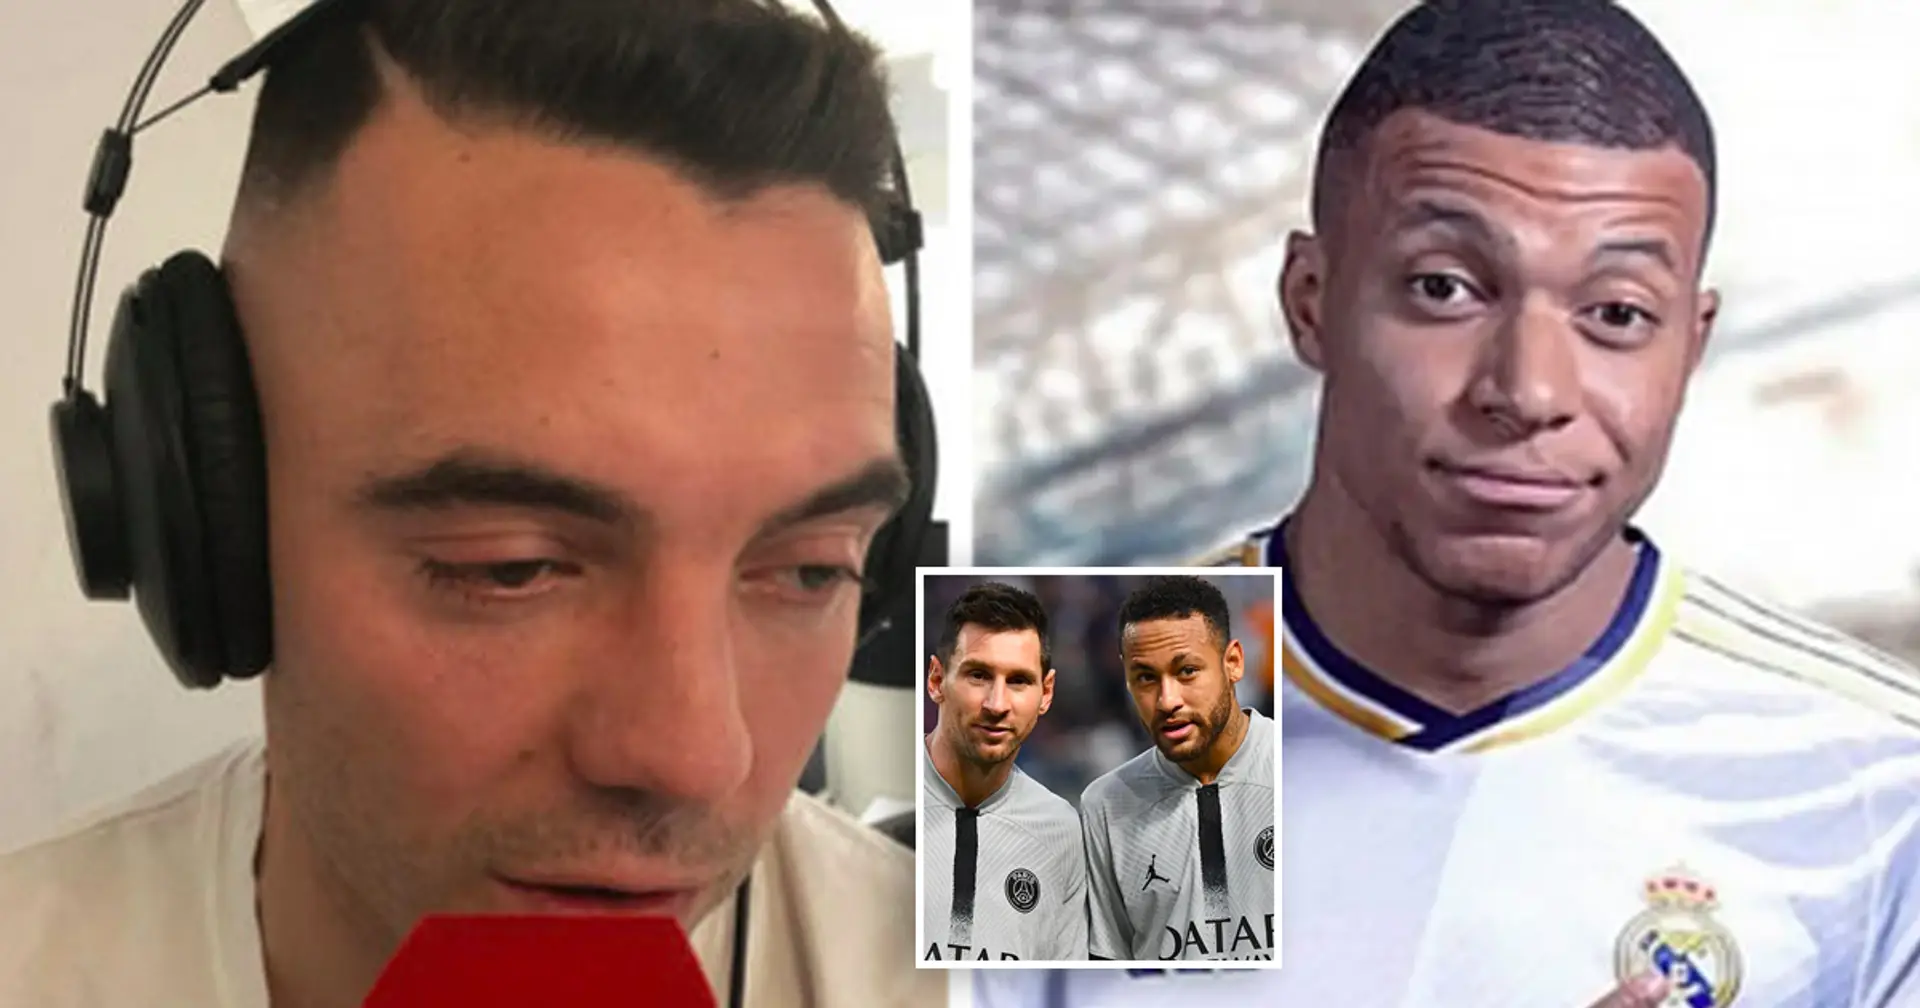 'PSG with Messi and Neymar seemed like a bomb too': Iago Aspas downplays hype around Mbappe move